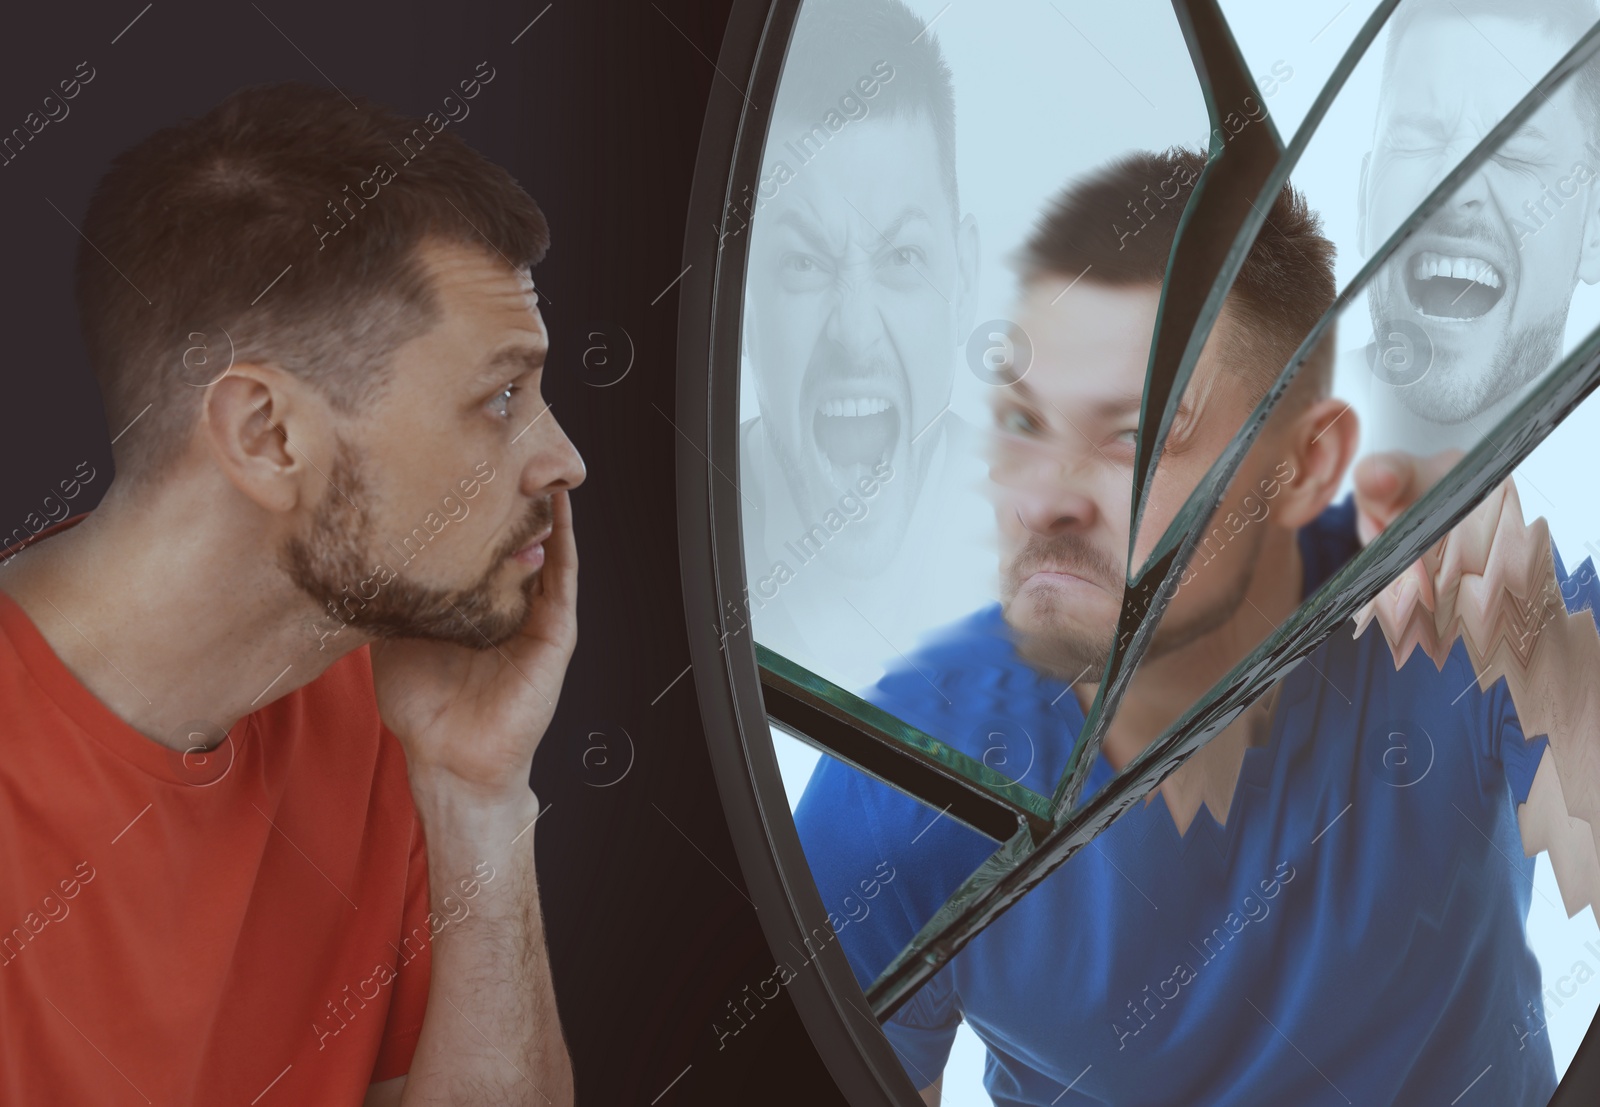 Image of Suffering from hallucinations. Man looking in broken mirror and seeing himself with different emotions